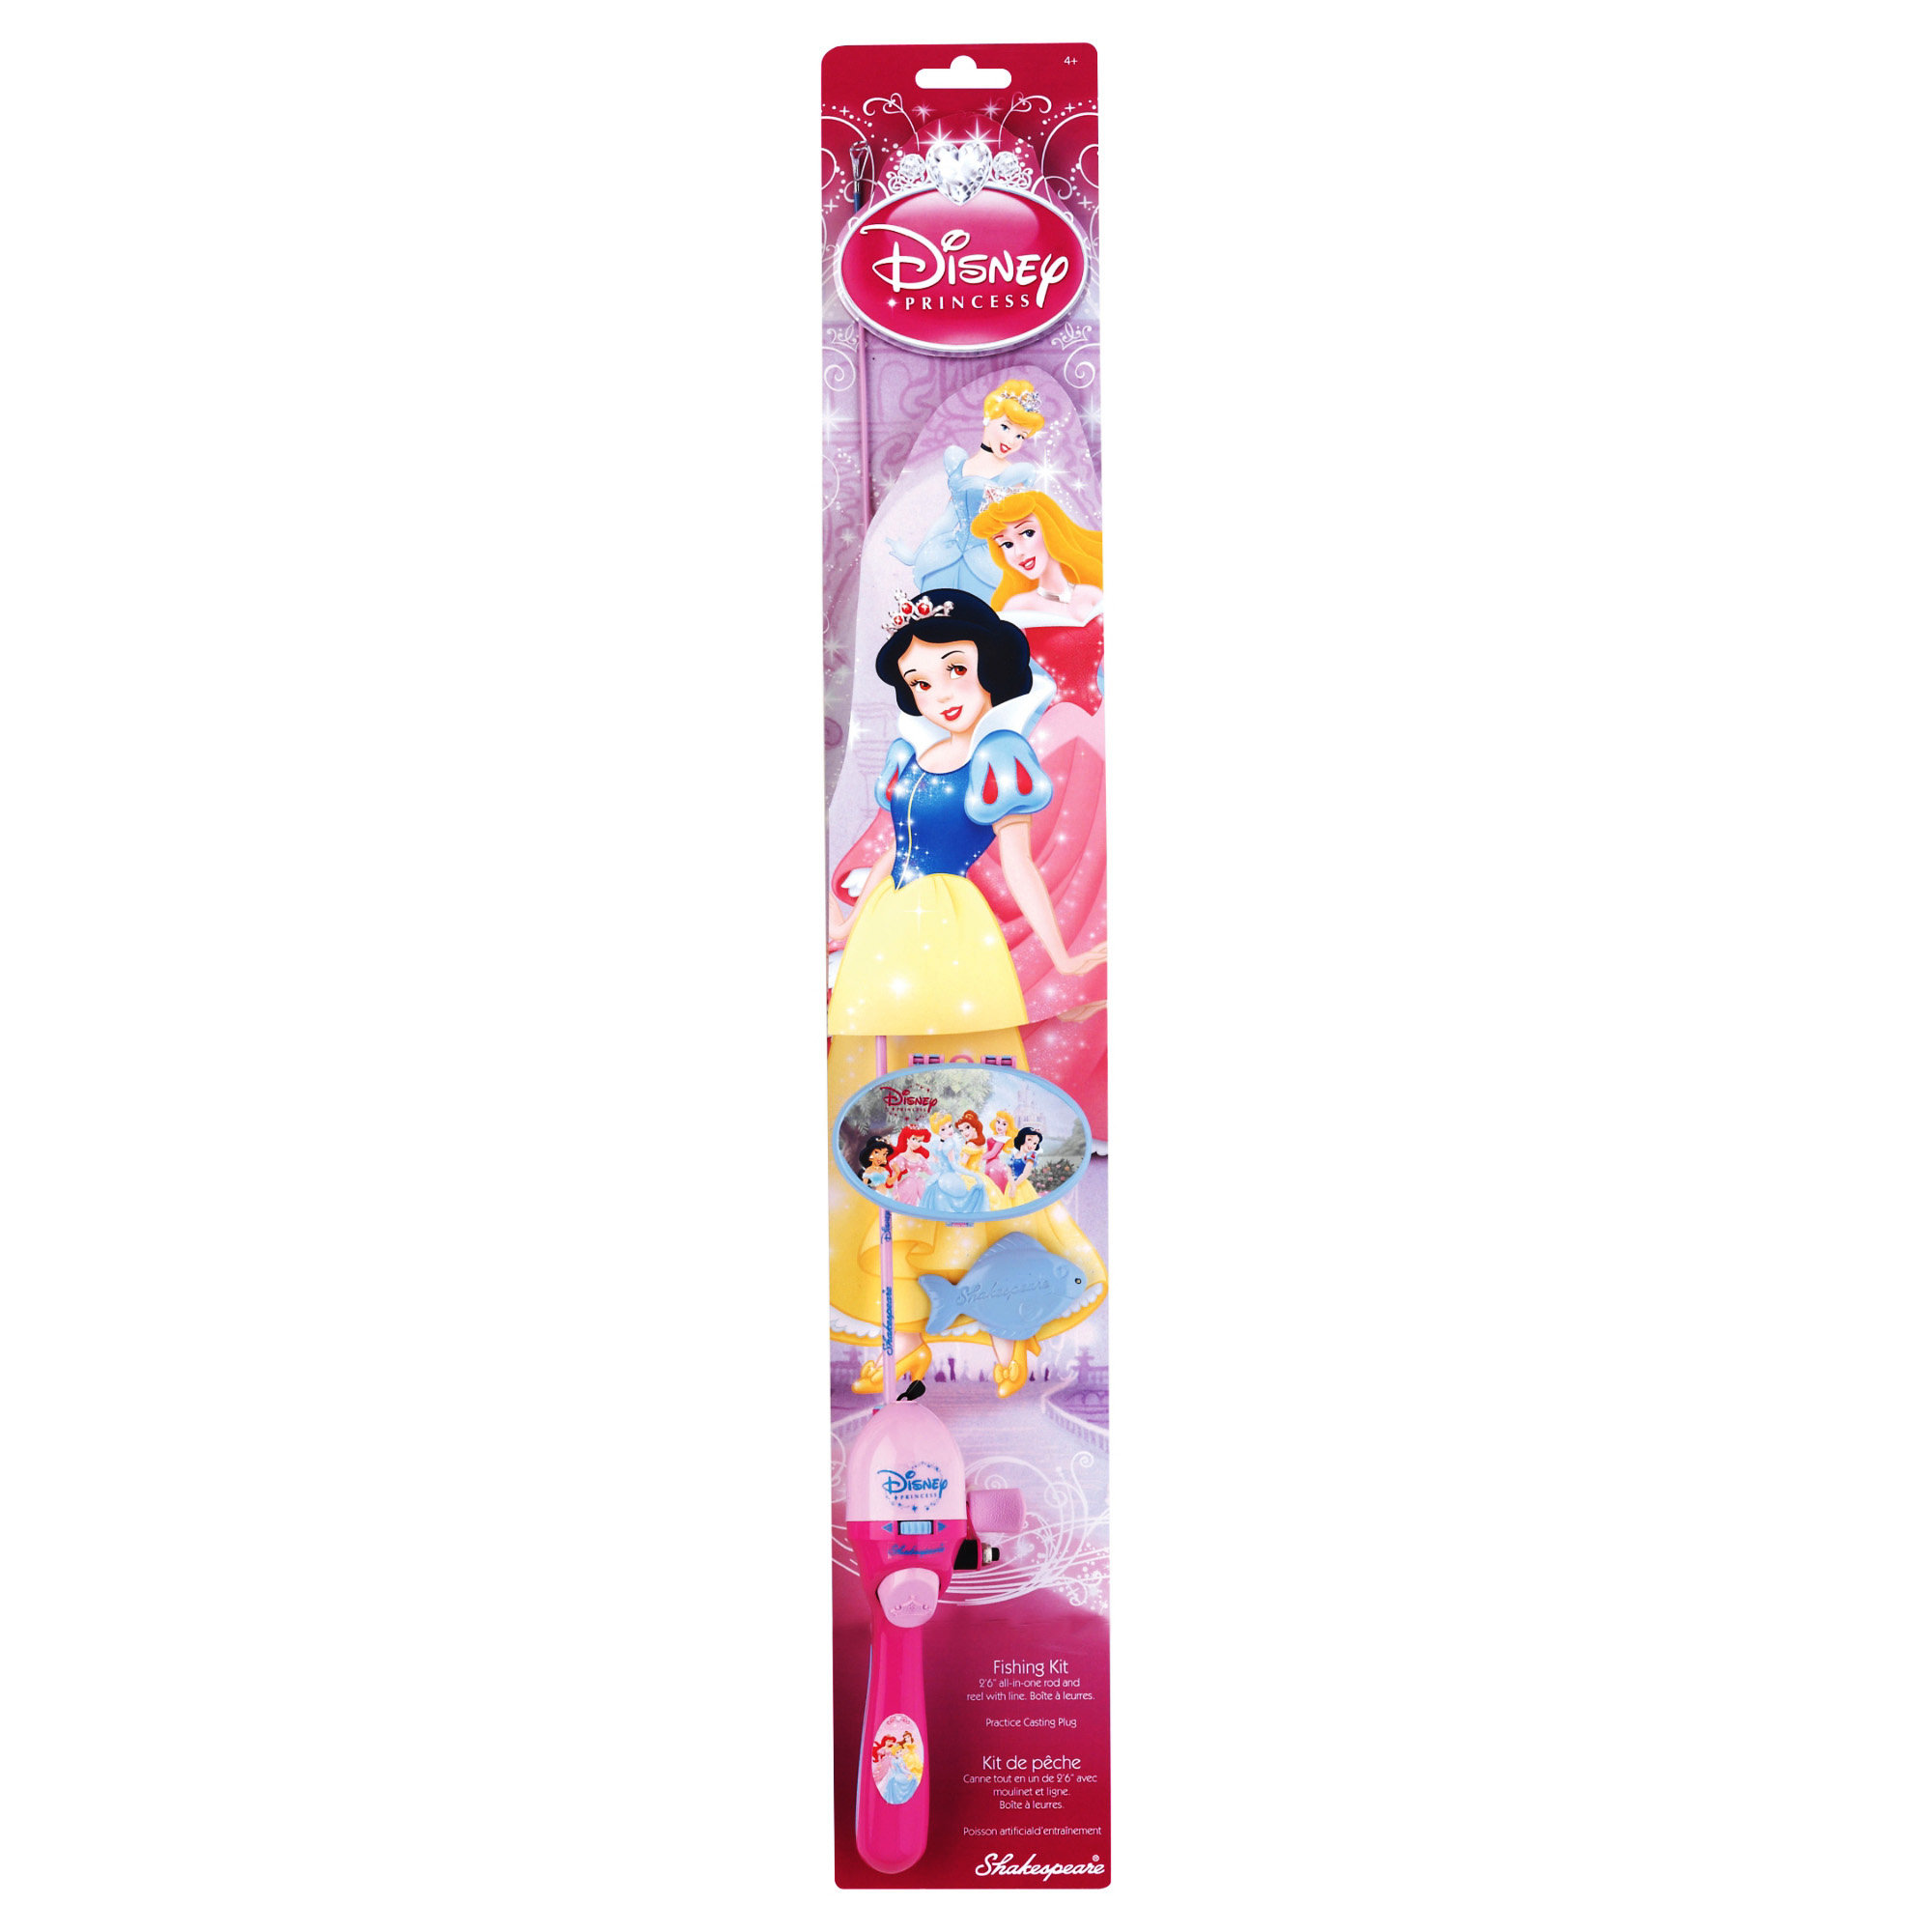 Shakespeare Disney Princess All-In-One 2'6" Rod And Reel Casting Kit with Tackle Box - image 2 of 2